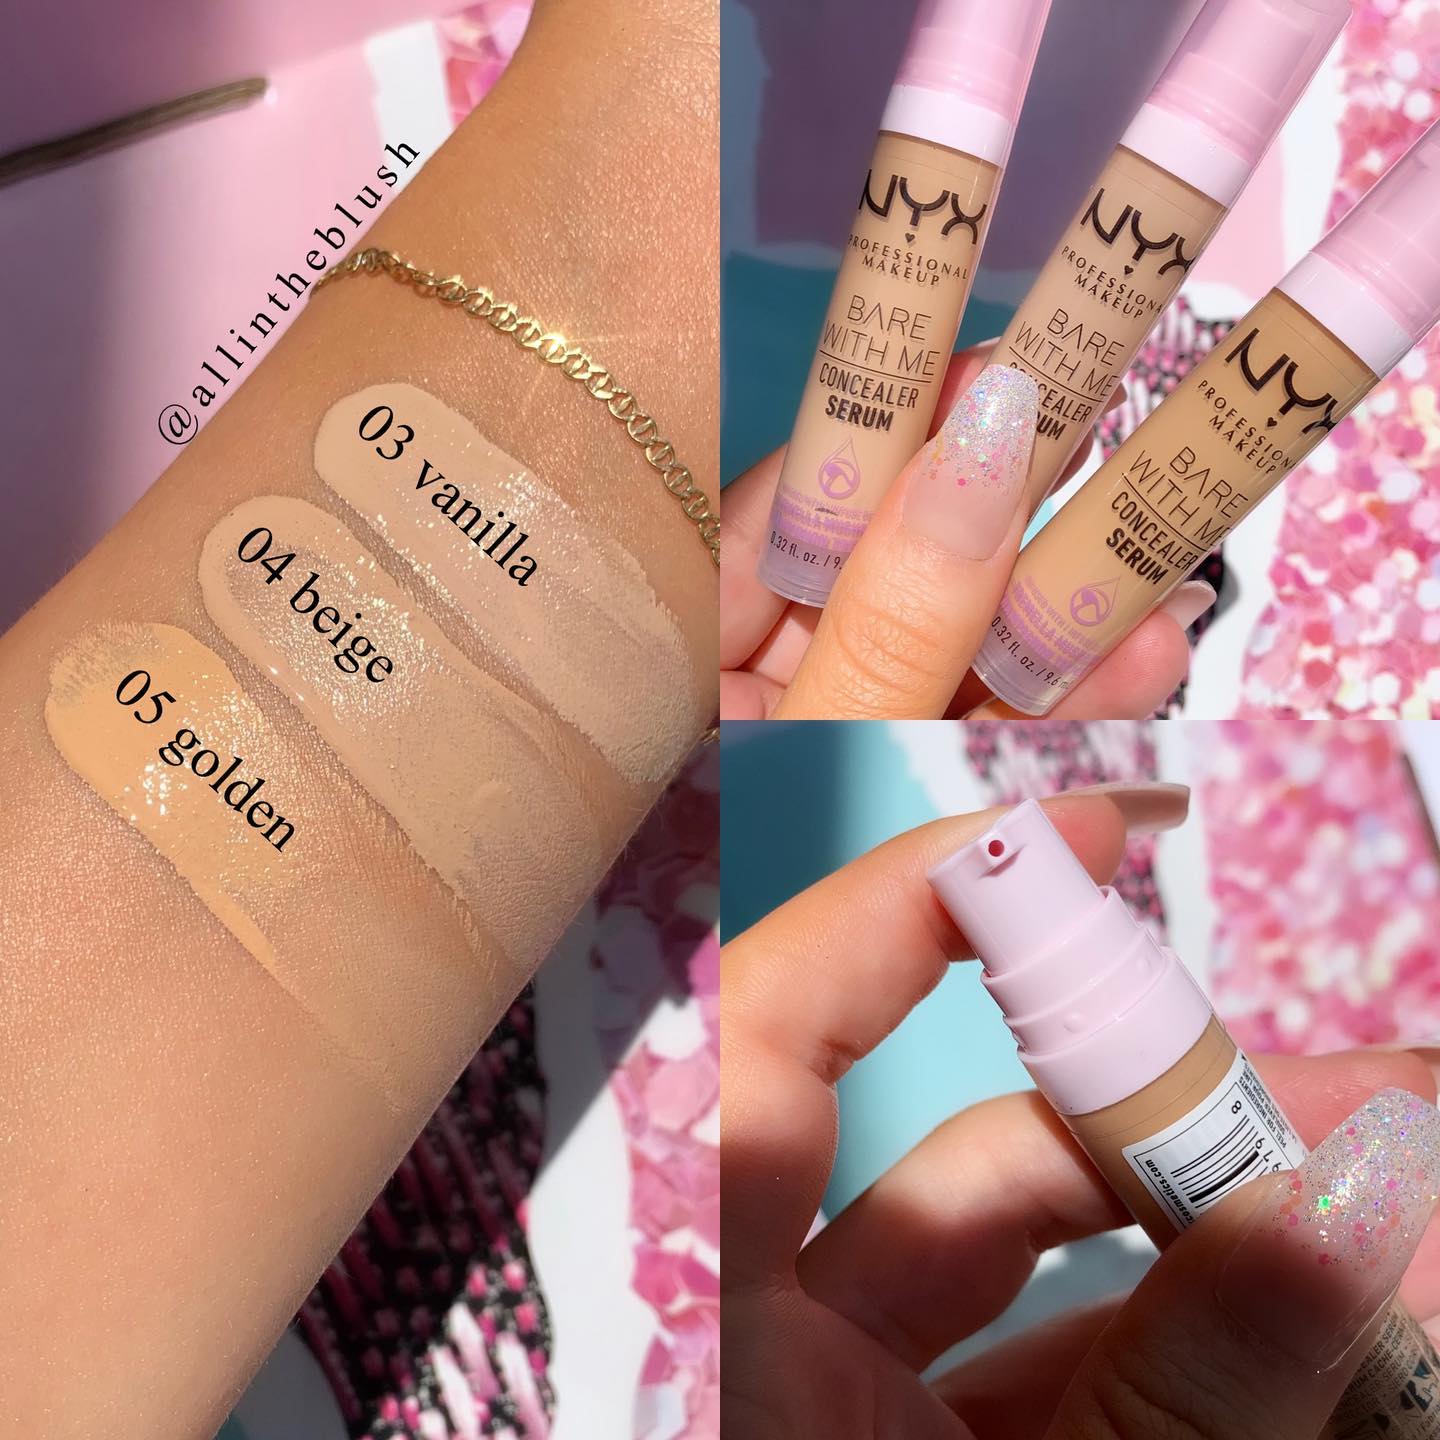 NEW Bare With All Serum - NYX: Swatches from Concealer Review In & The Blush Me